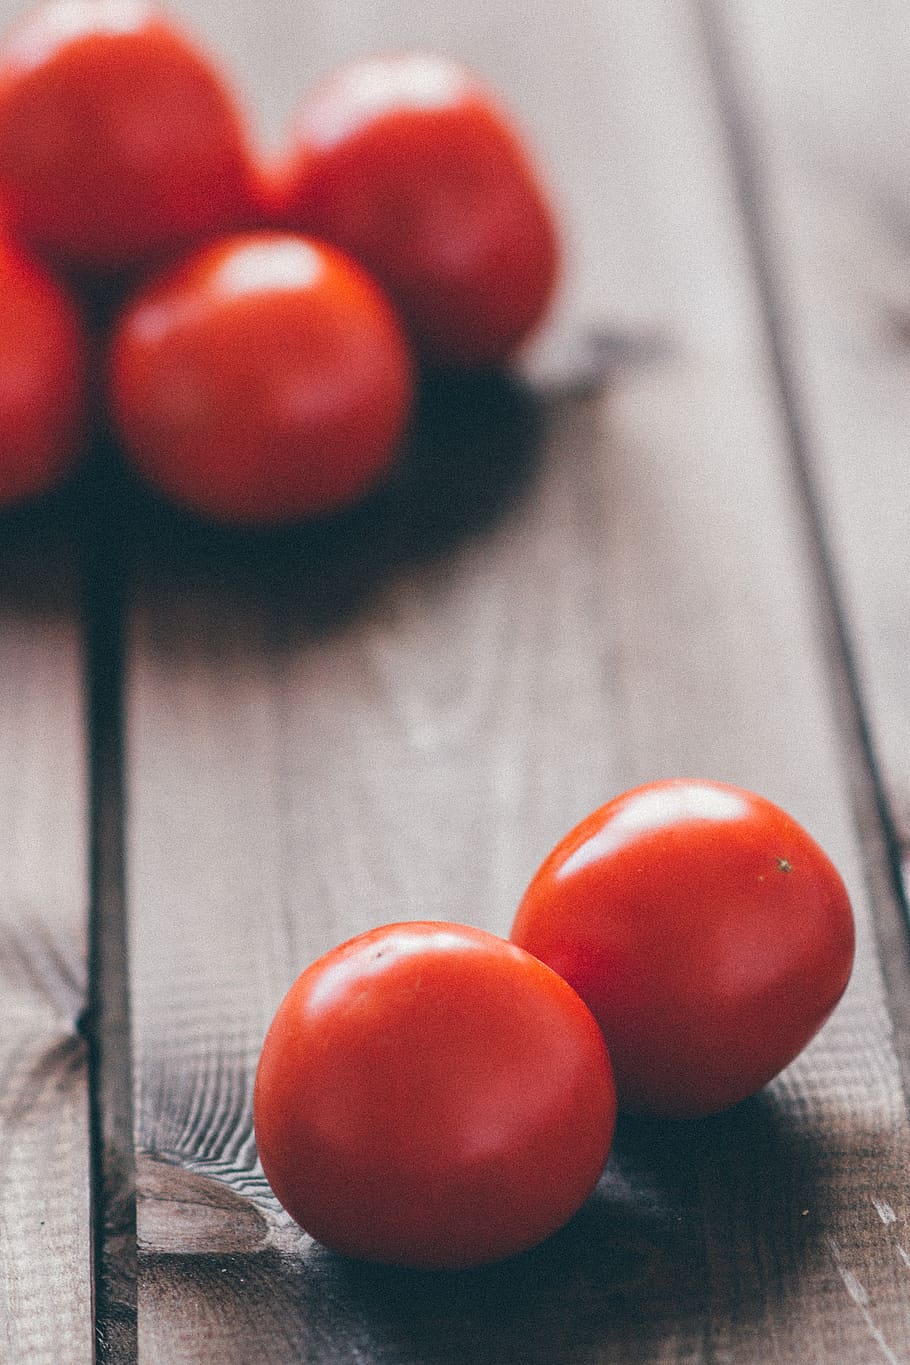 tomatoes, vegetables, food, healthy, red, tomato, food and drink, table, healthy eating, freshness